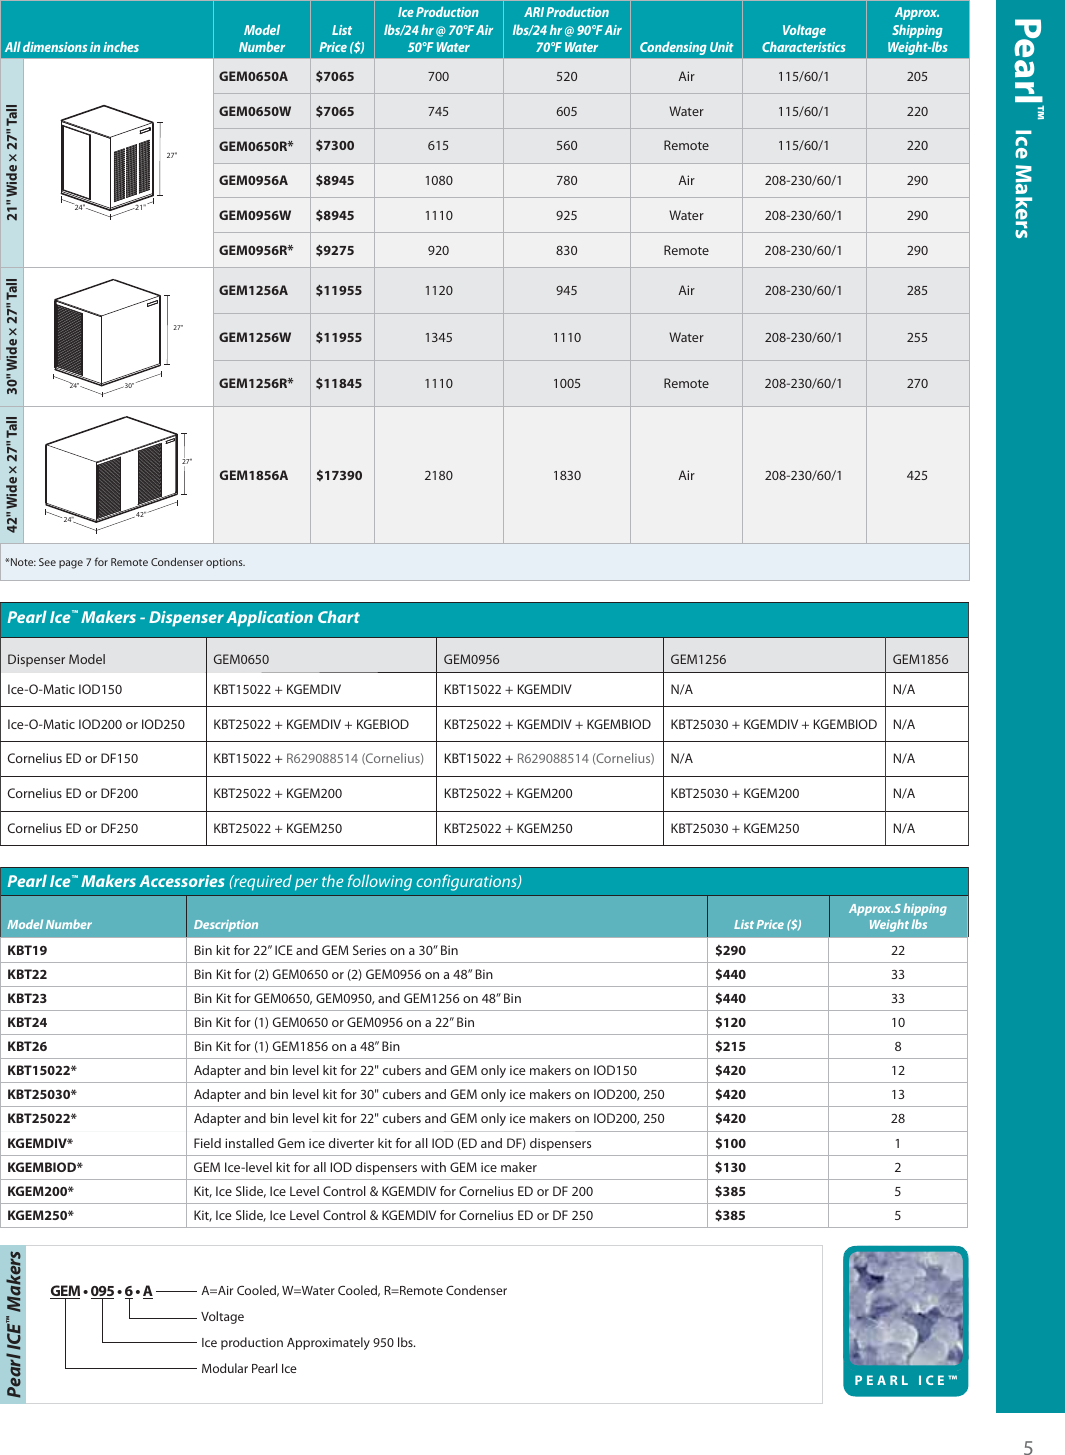 Page 5 of 12 - Iceomatic Pricelist 2009